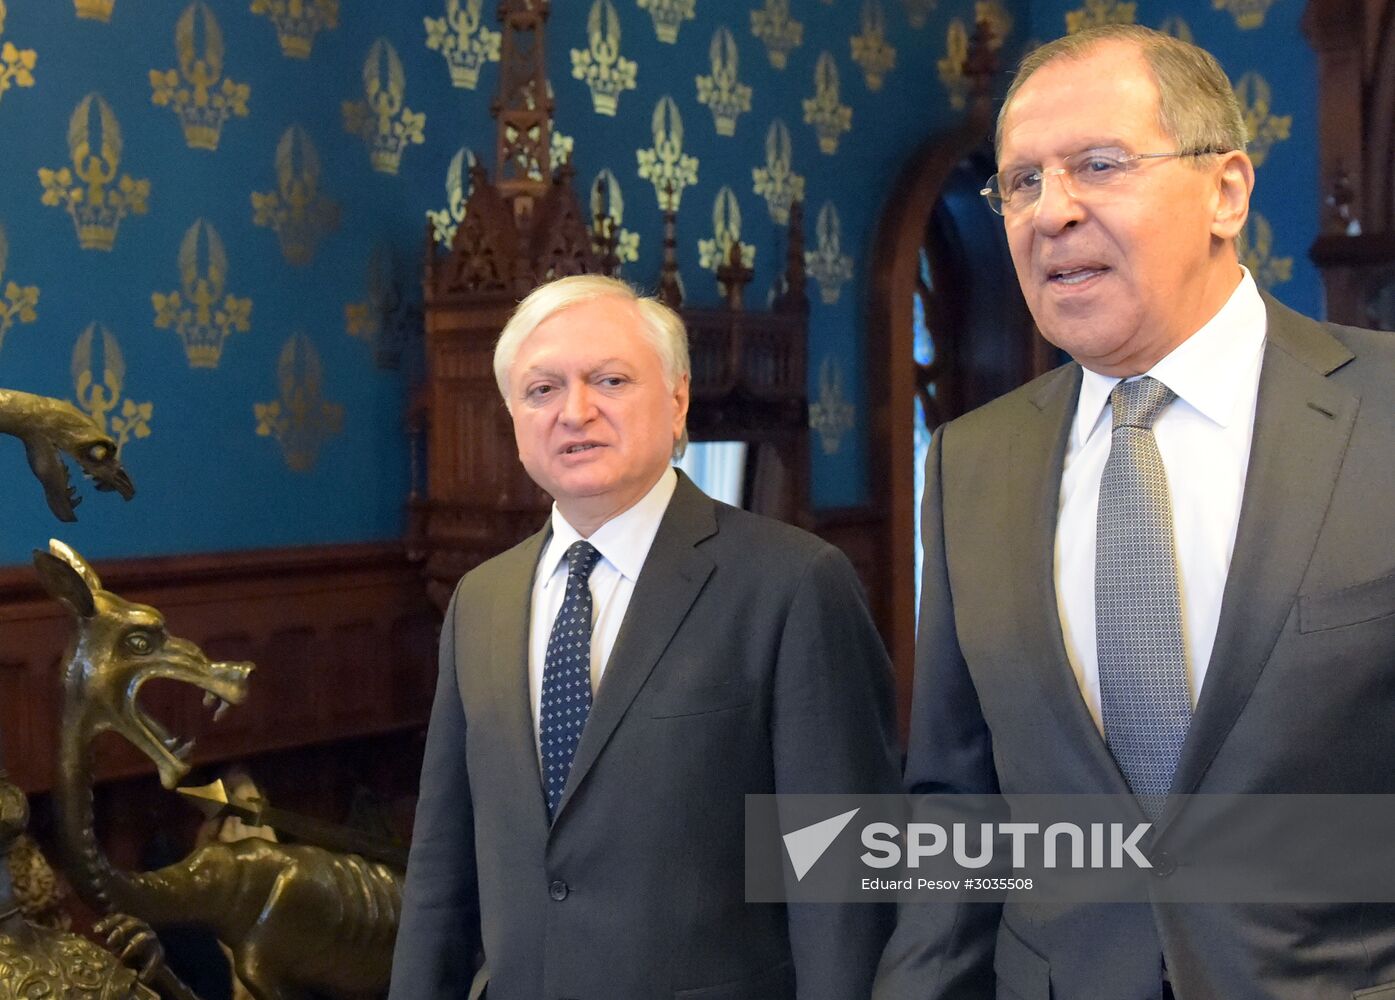 Sergei Lavrov meets with Armenian Foreign Minister Edward Nalbandyan